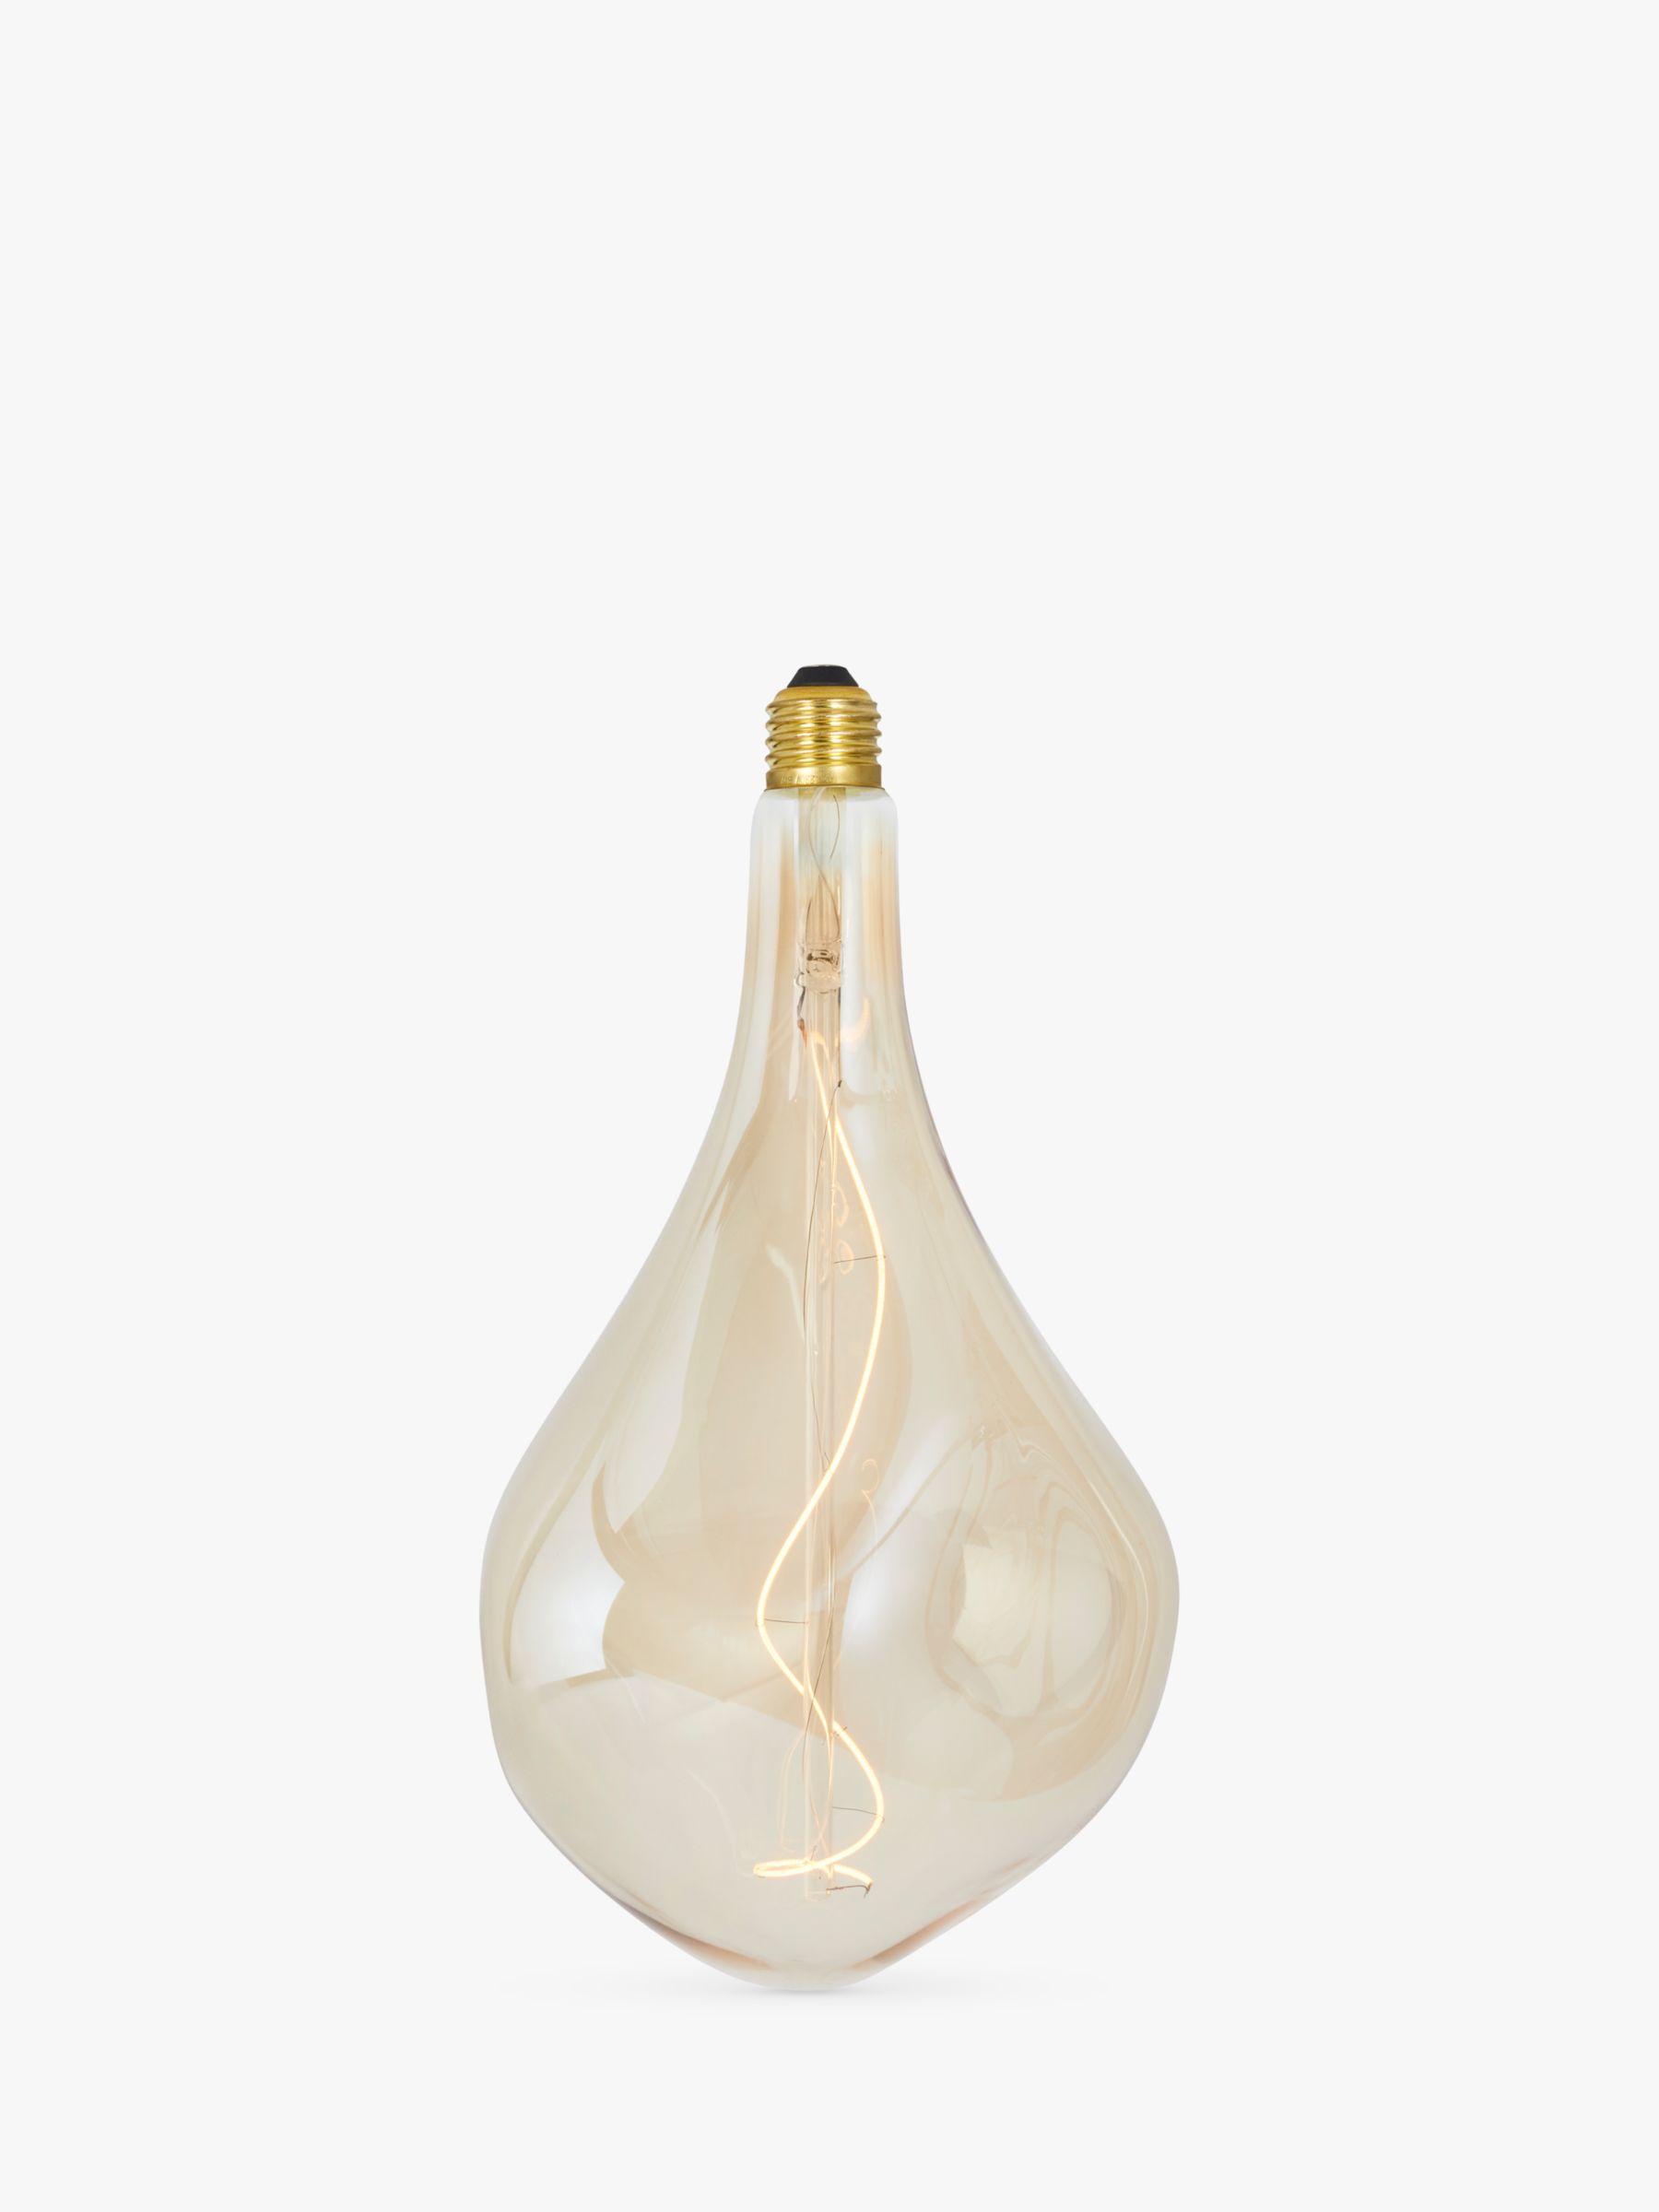 Tala Voronoi III 5W ES LED Dimmable Bulb, Clear/Gold at John Lewis